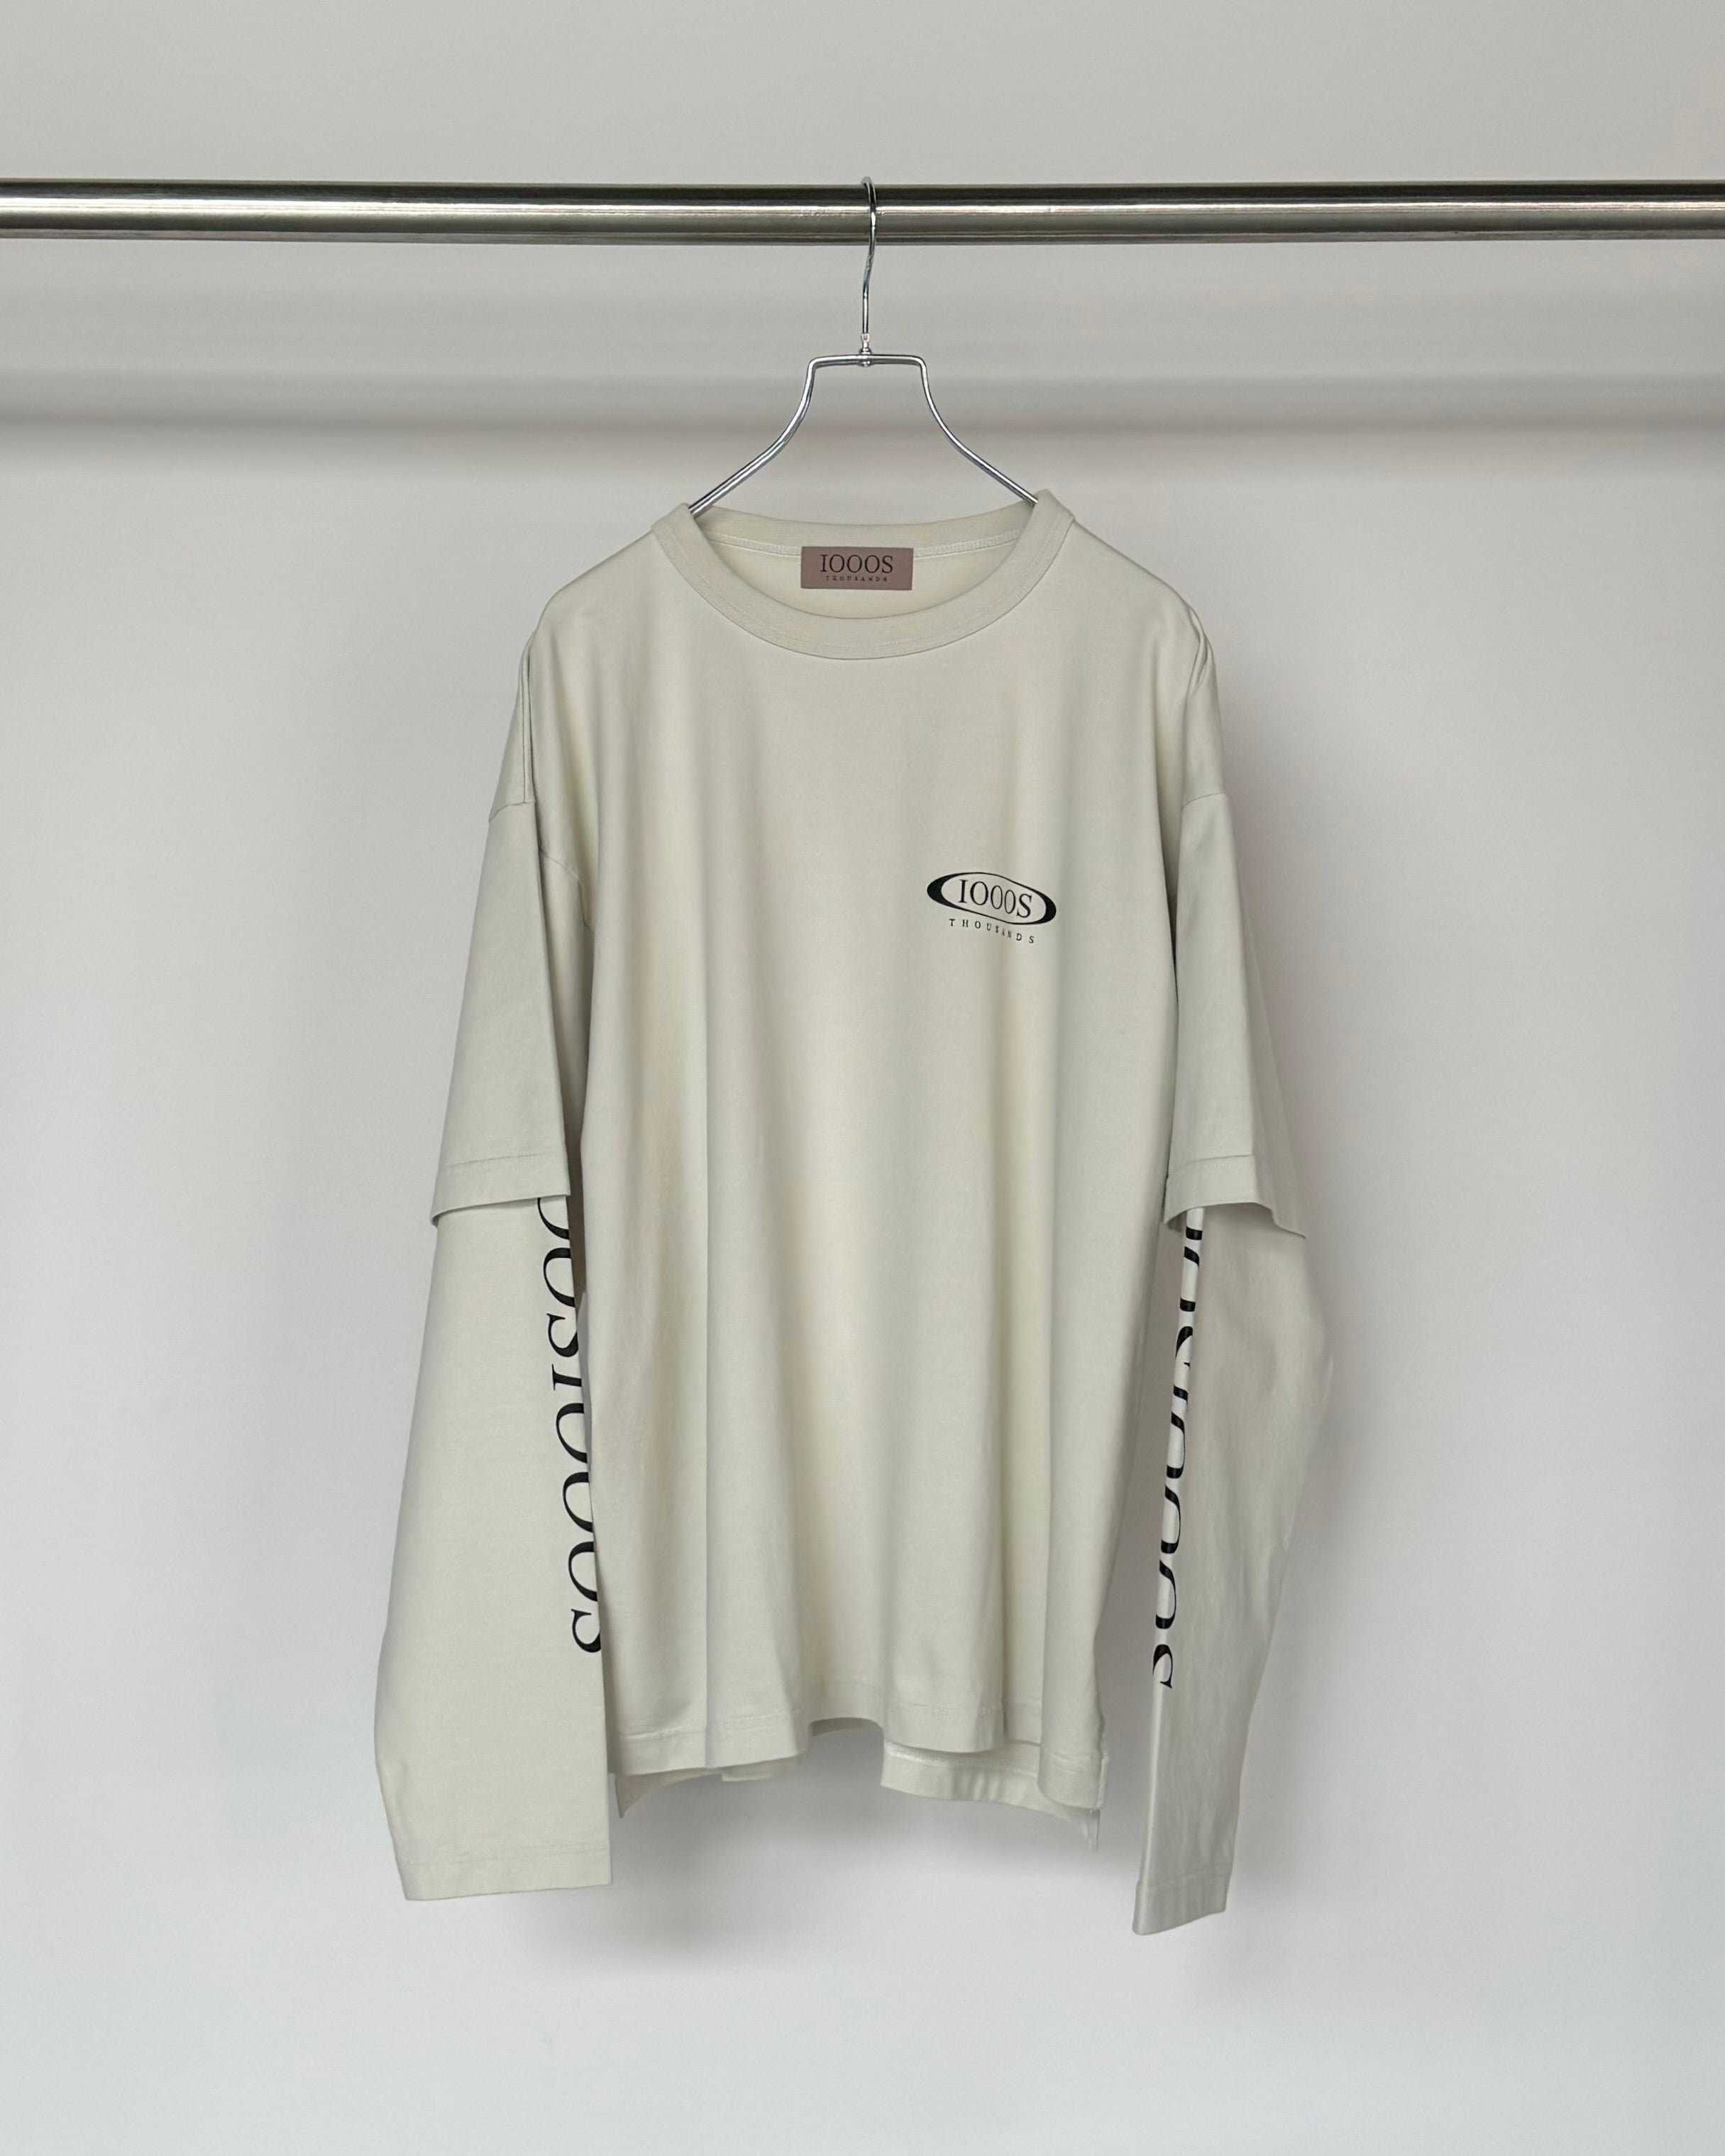 1000s thousands / LAYERED LS TEE - SHADOW WHITE